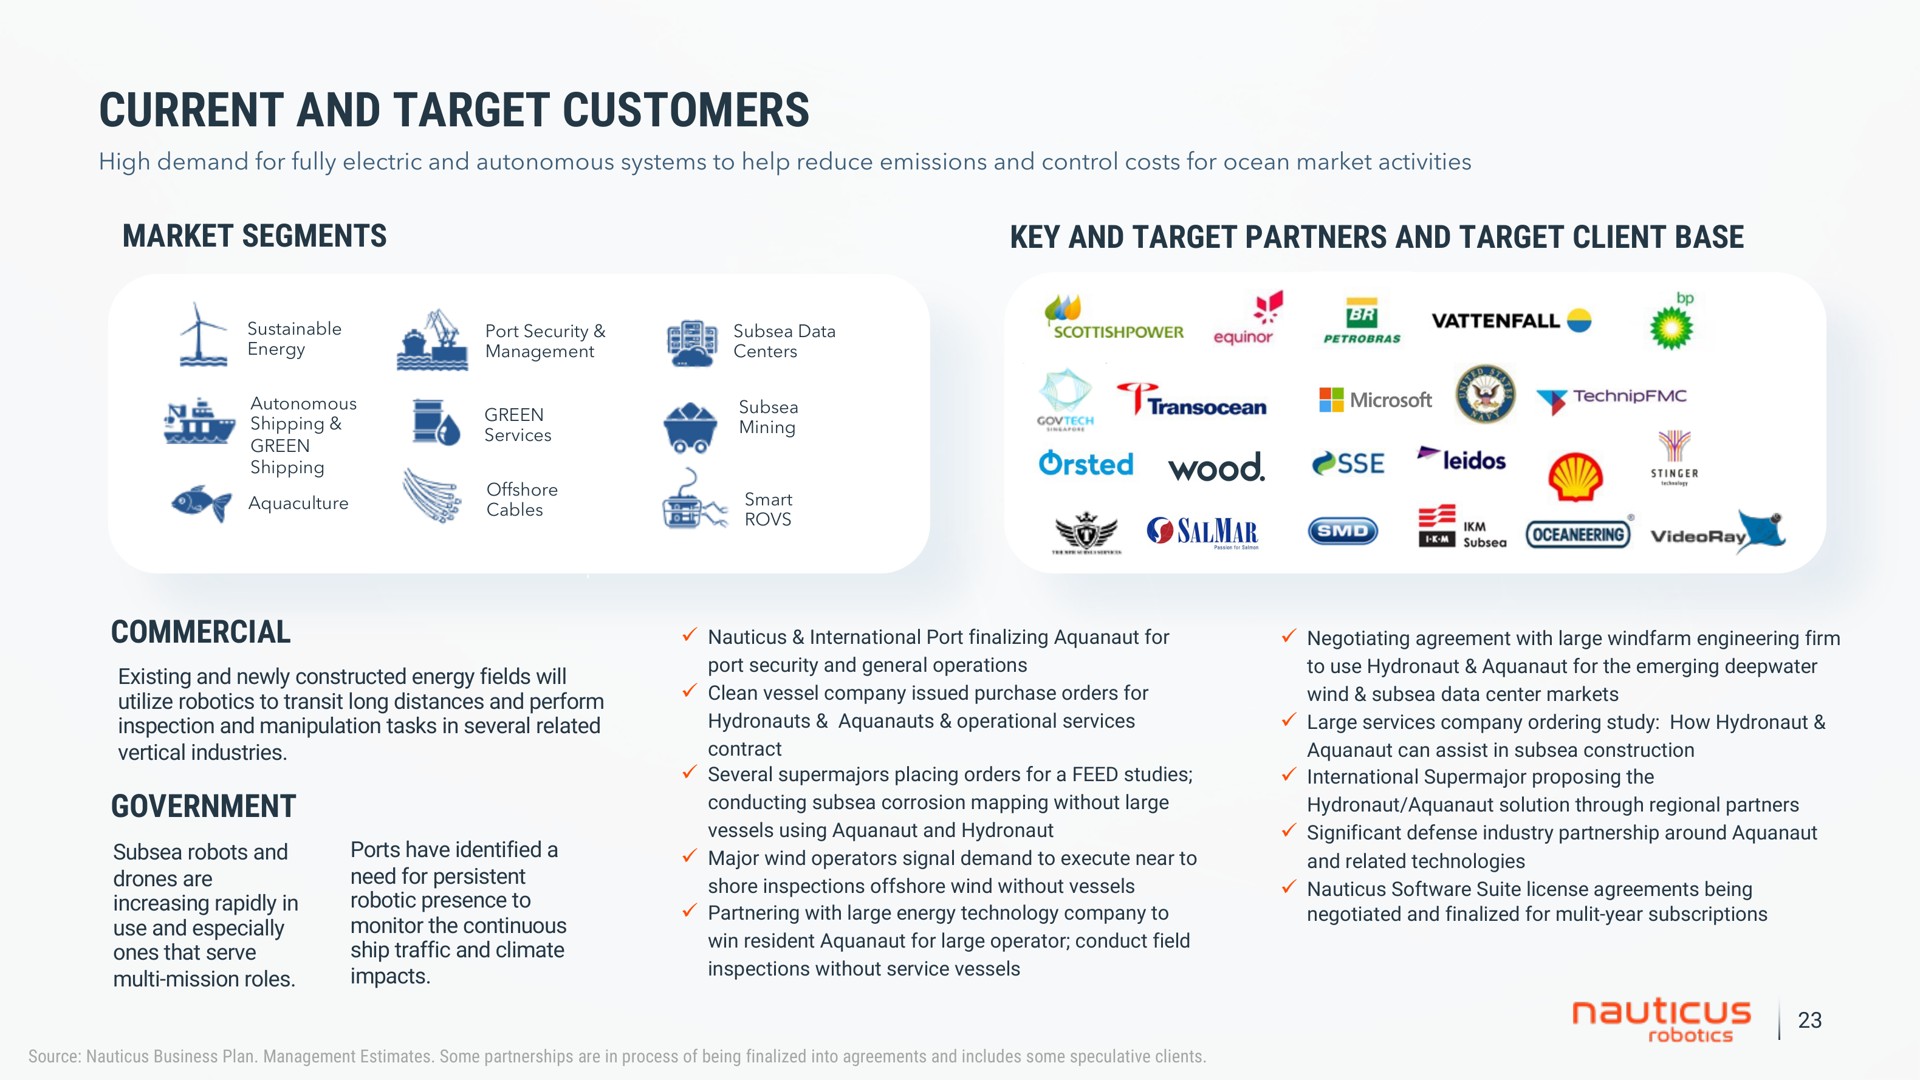 current and target customers market segments key and target partners and target client base commercial government ger | Nauticus